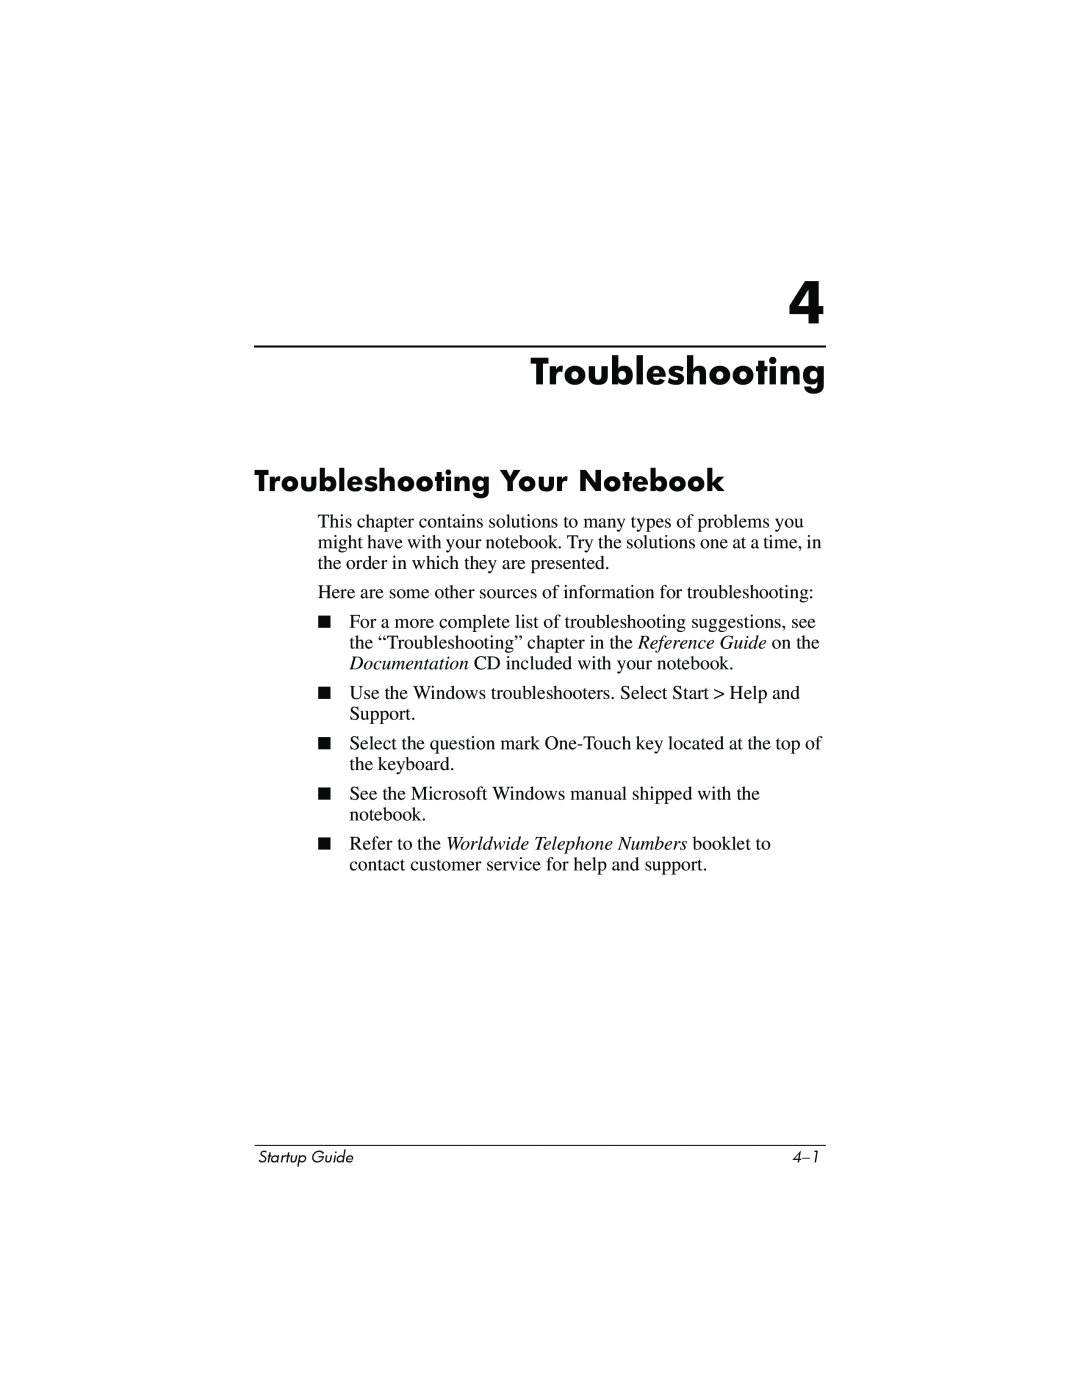 Compaq Personal Computer manual Troubleshooting Your Notebook 